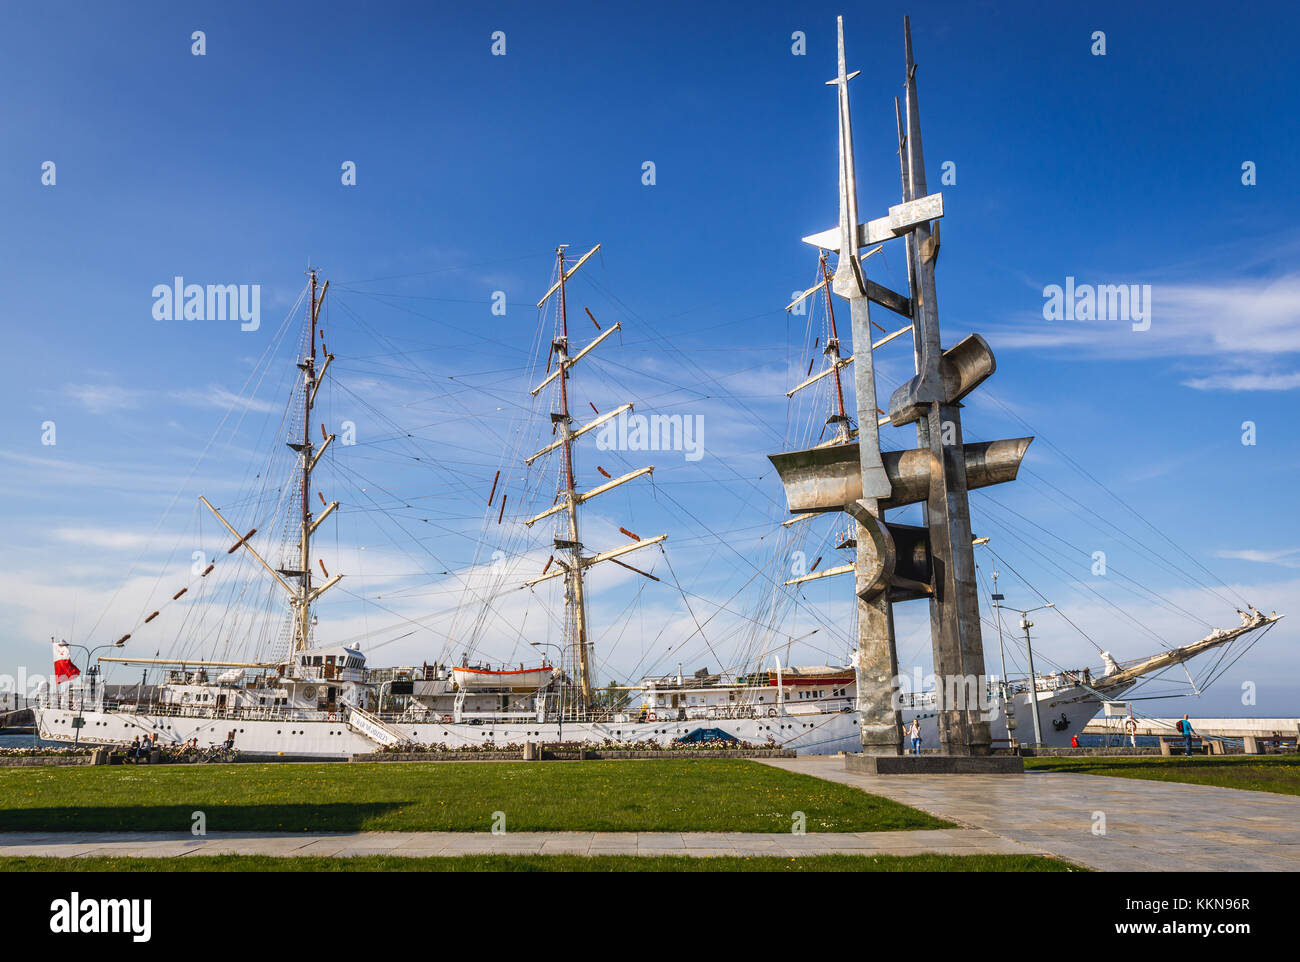 Sail training ship Dar Mlodziezy (Gift of the Youth) and Sails Monument in Port of Gdynia city, Pomeranian Voivodeship of Poland Stock Photo